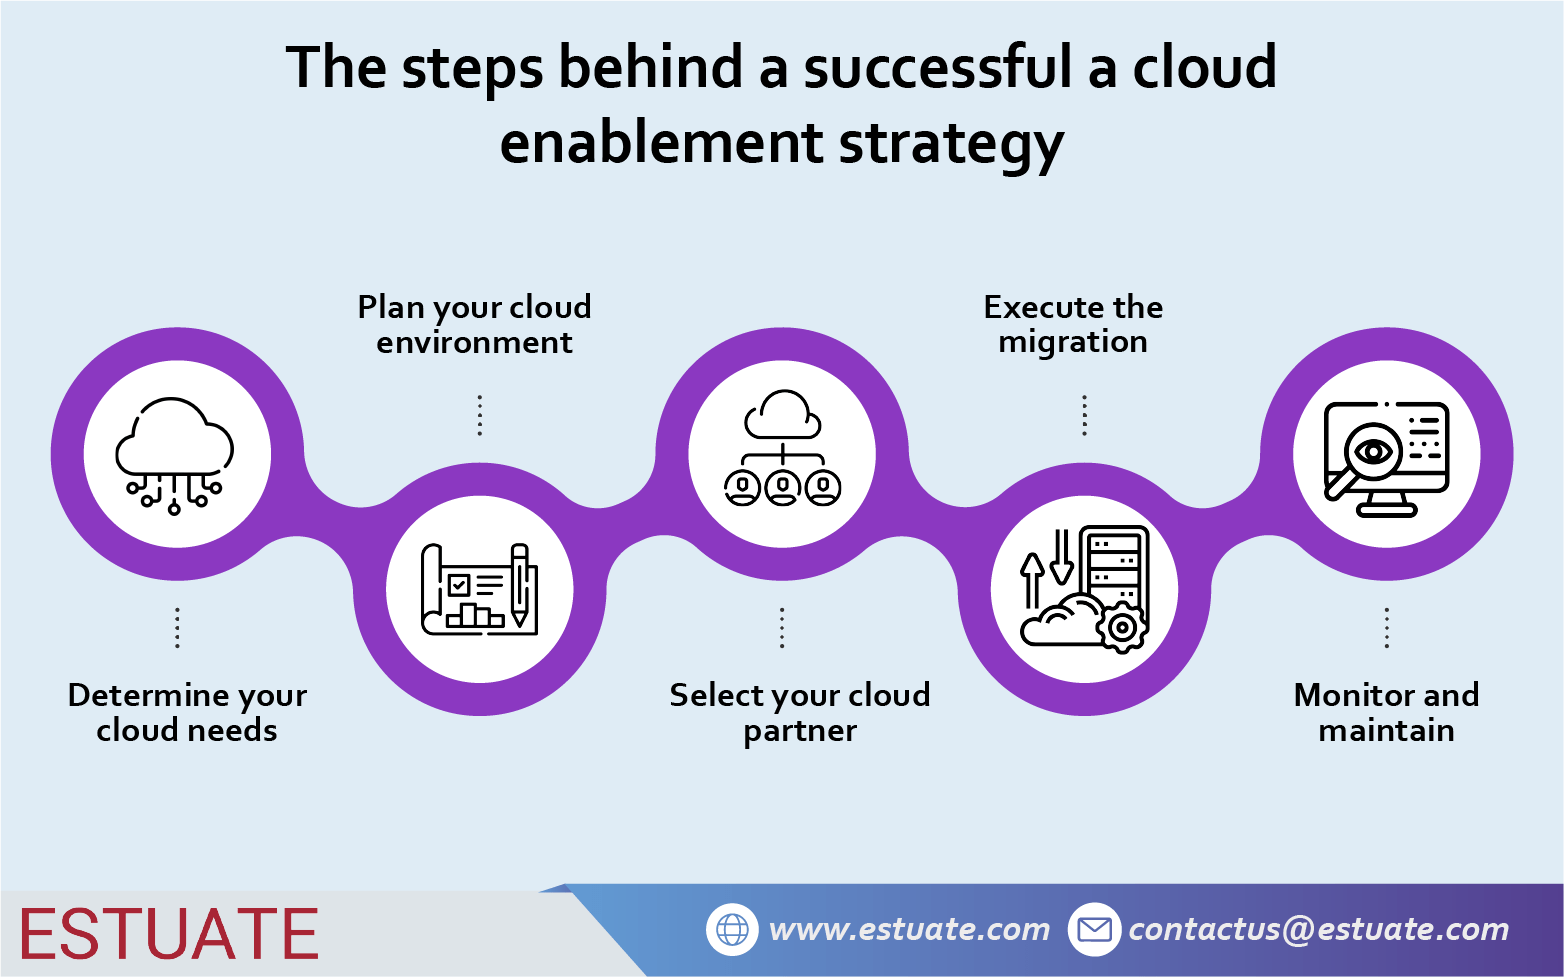 The steps behind a successful cloud enablement strategy